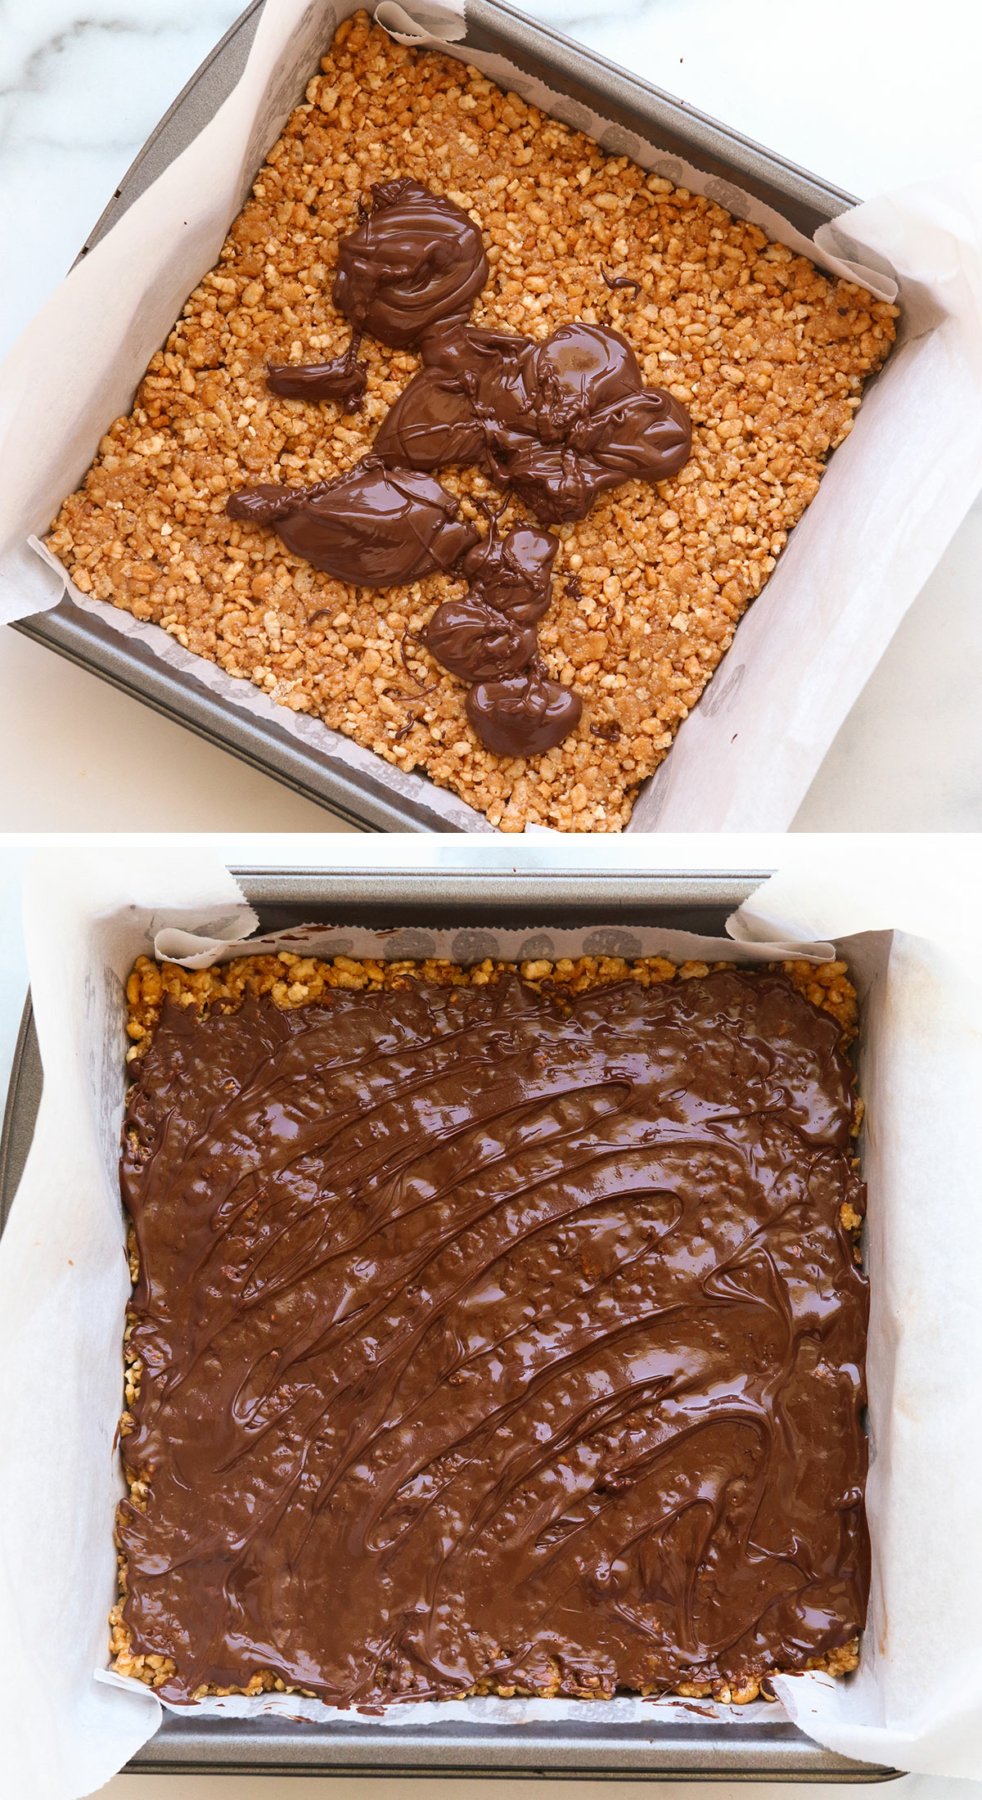 melted chocolate spread over rice crispy treats.